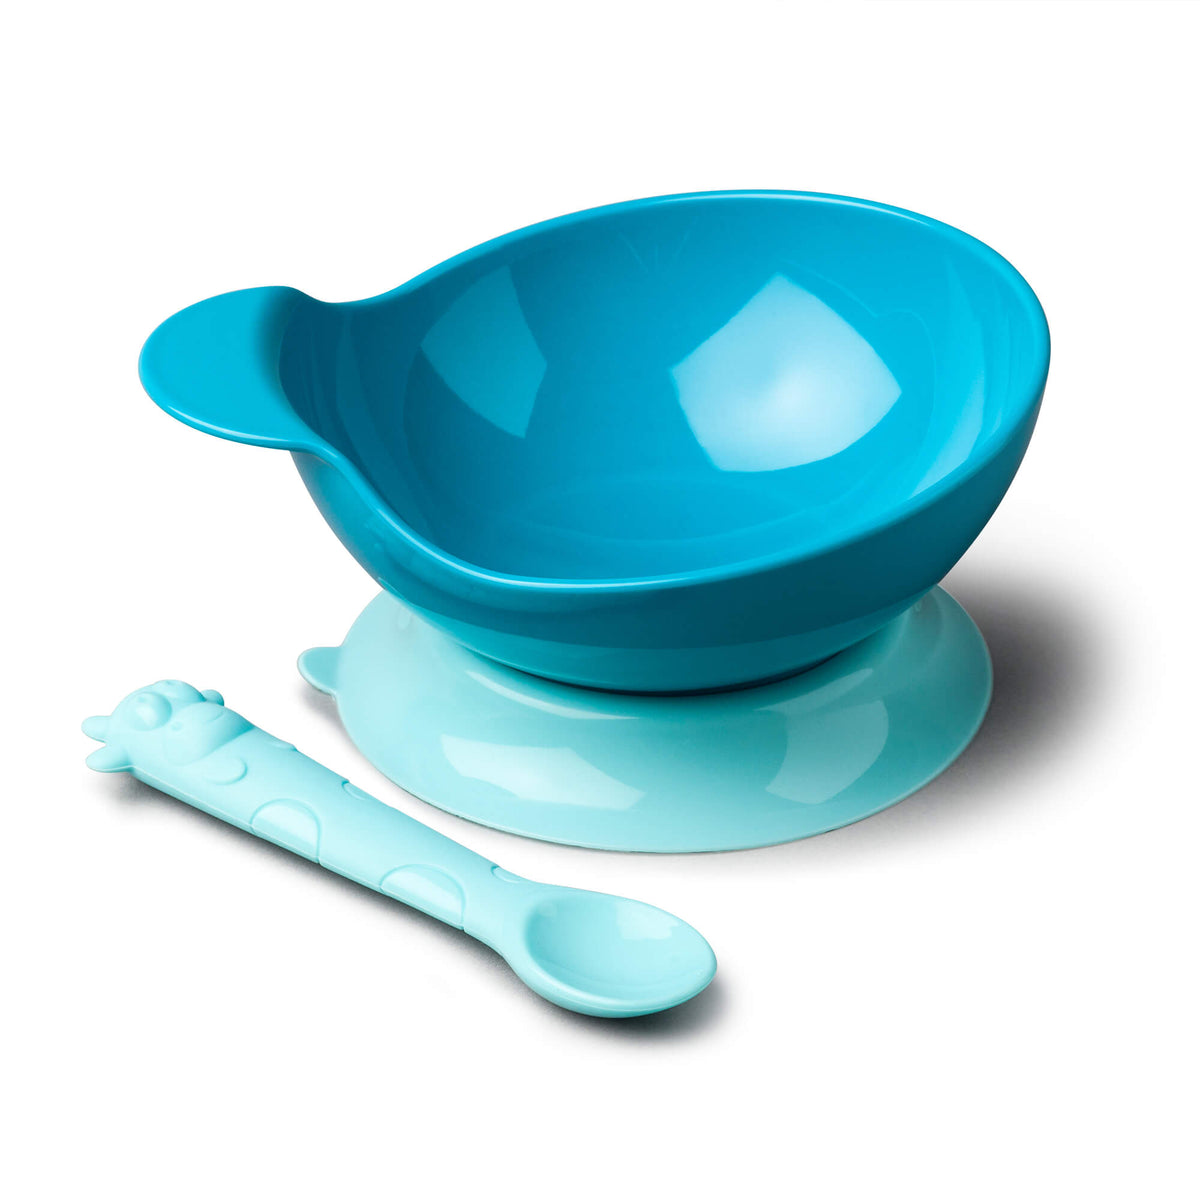 Silicone Baby Bowl & Spoon Set – Blue - otterlove by Platinum Pure